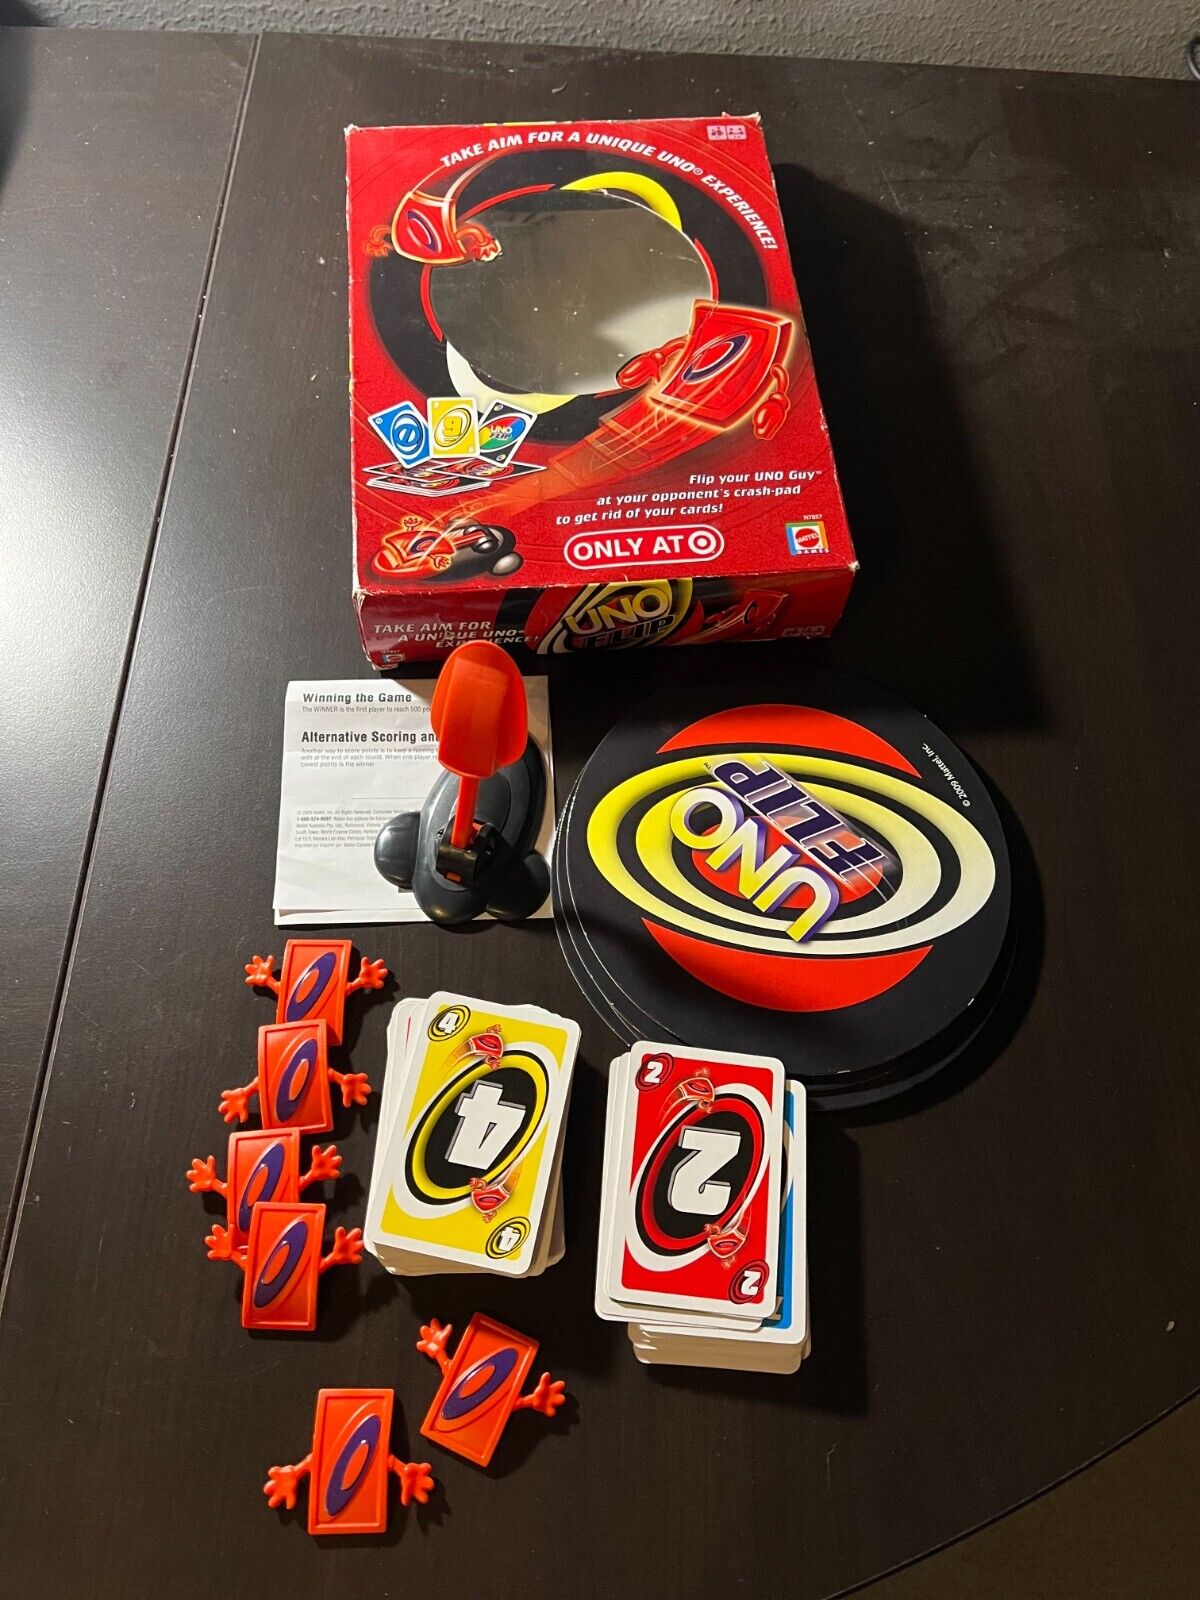 Uno Card Game : Target